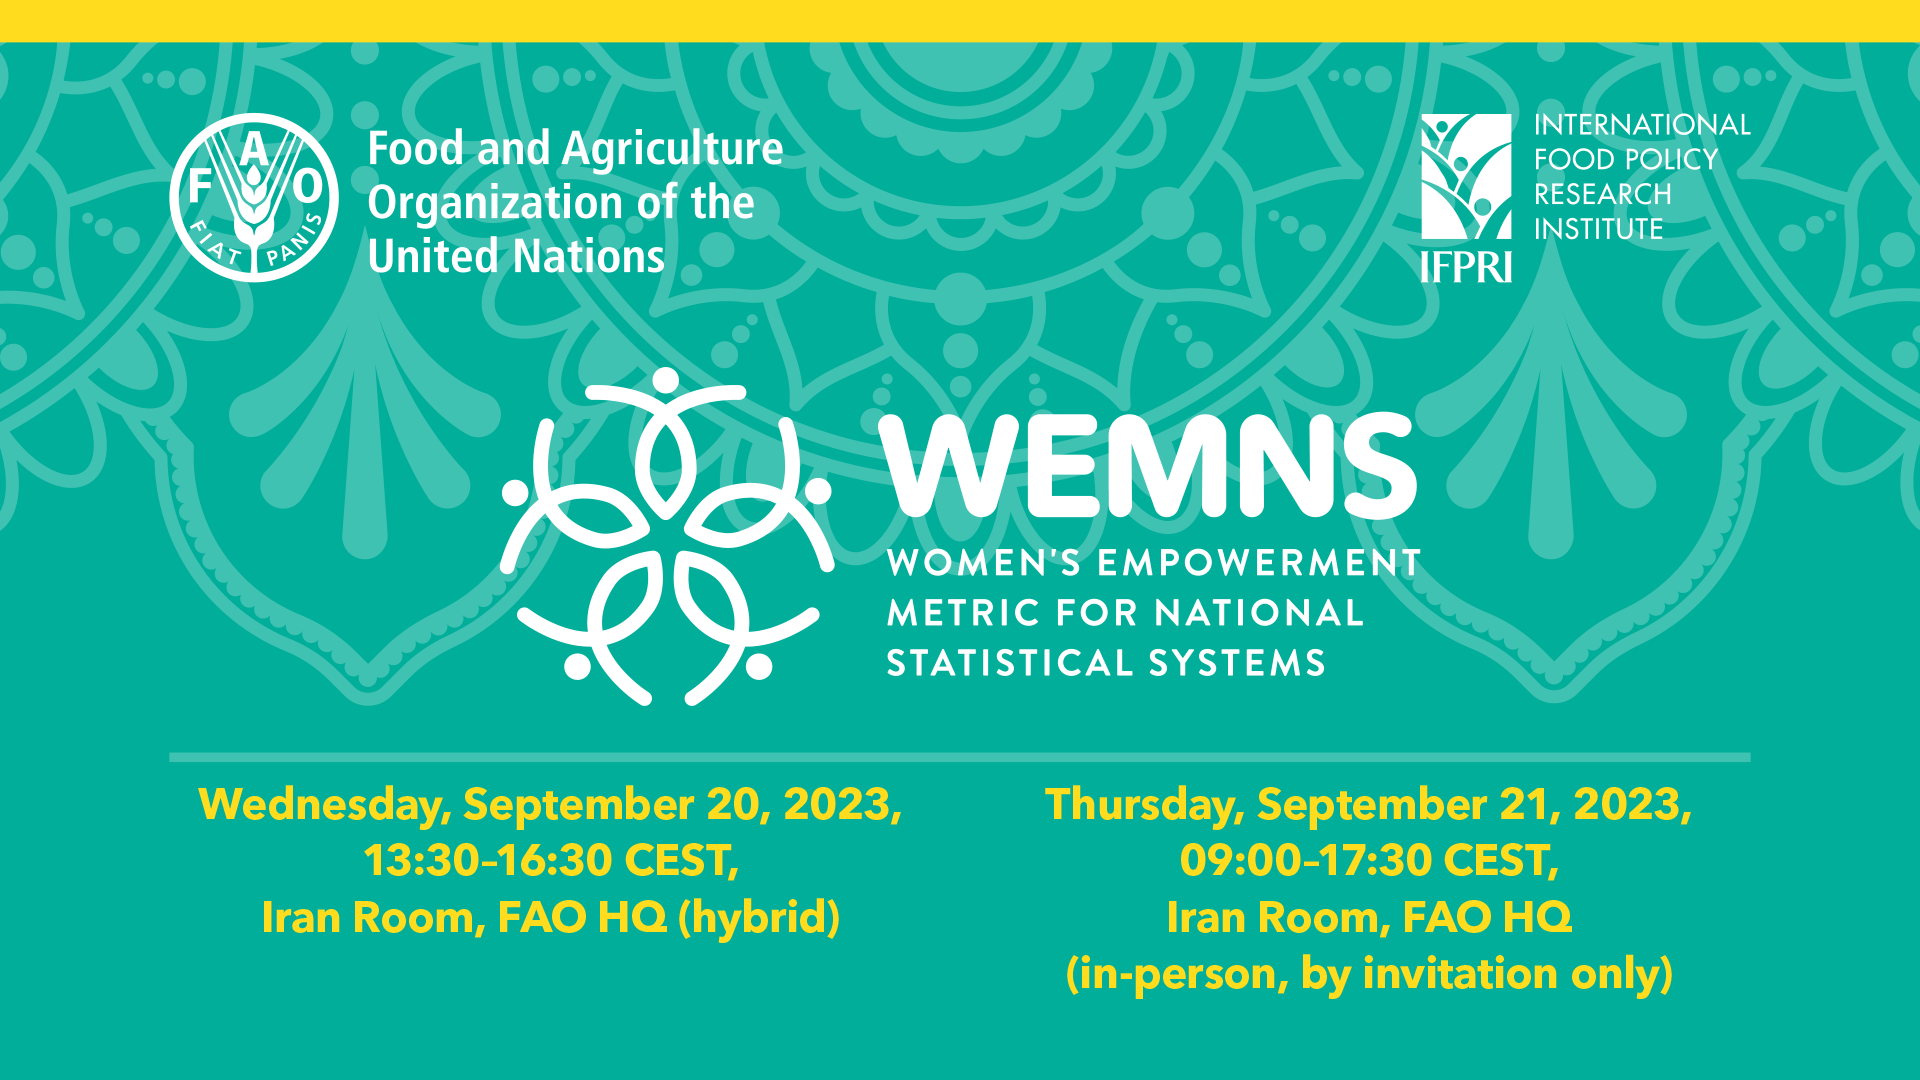 Women’s Empowerment Metric for National Statistical Systems (WEMNS)